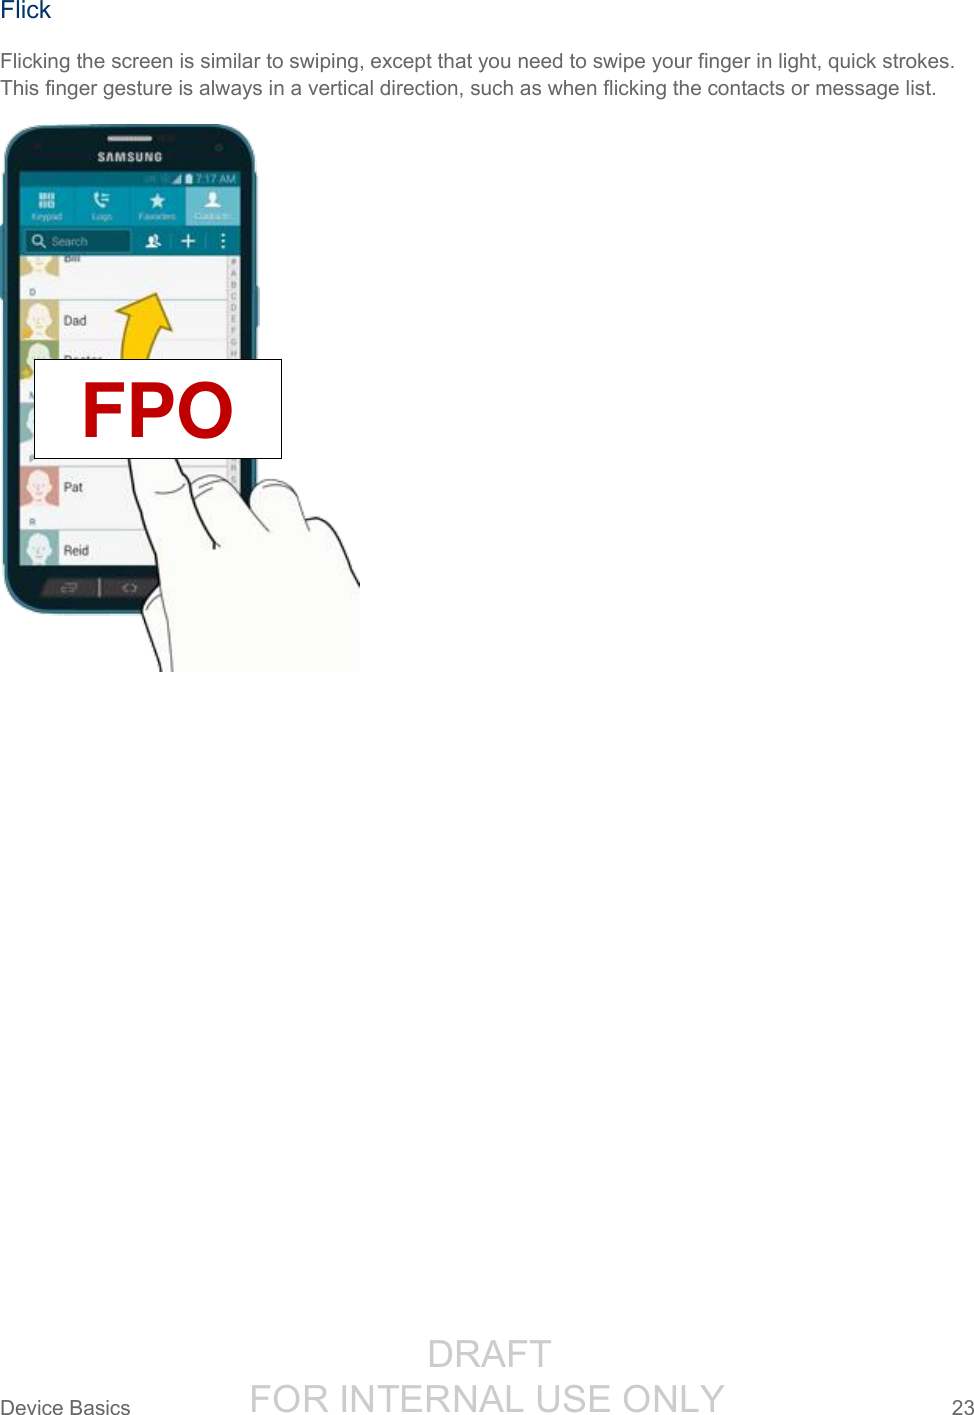                  DRAFT FOR INTERNAL USE ONLYDevice Basics  23   Flick Flicking the screen is similar to swiping, except that you need to swipe your finger in light, quick strokes. This finger gesture is always in a vertical direction, such as when flicking the contacts or message list.  FPO 